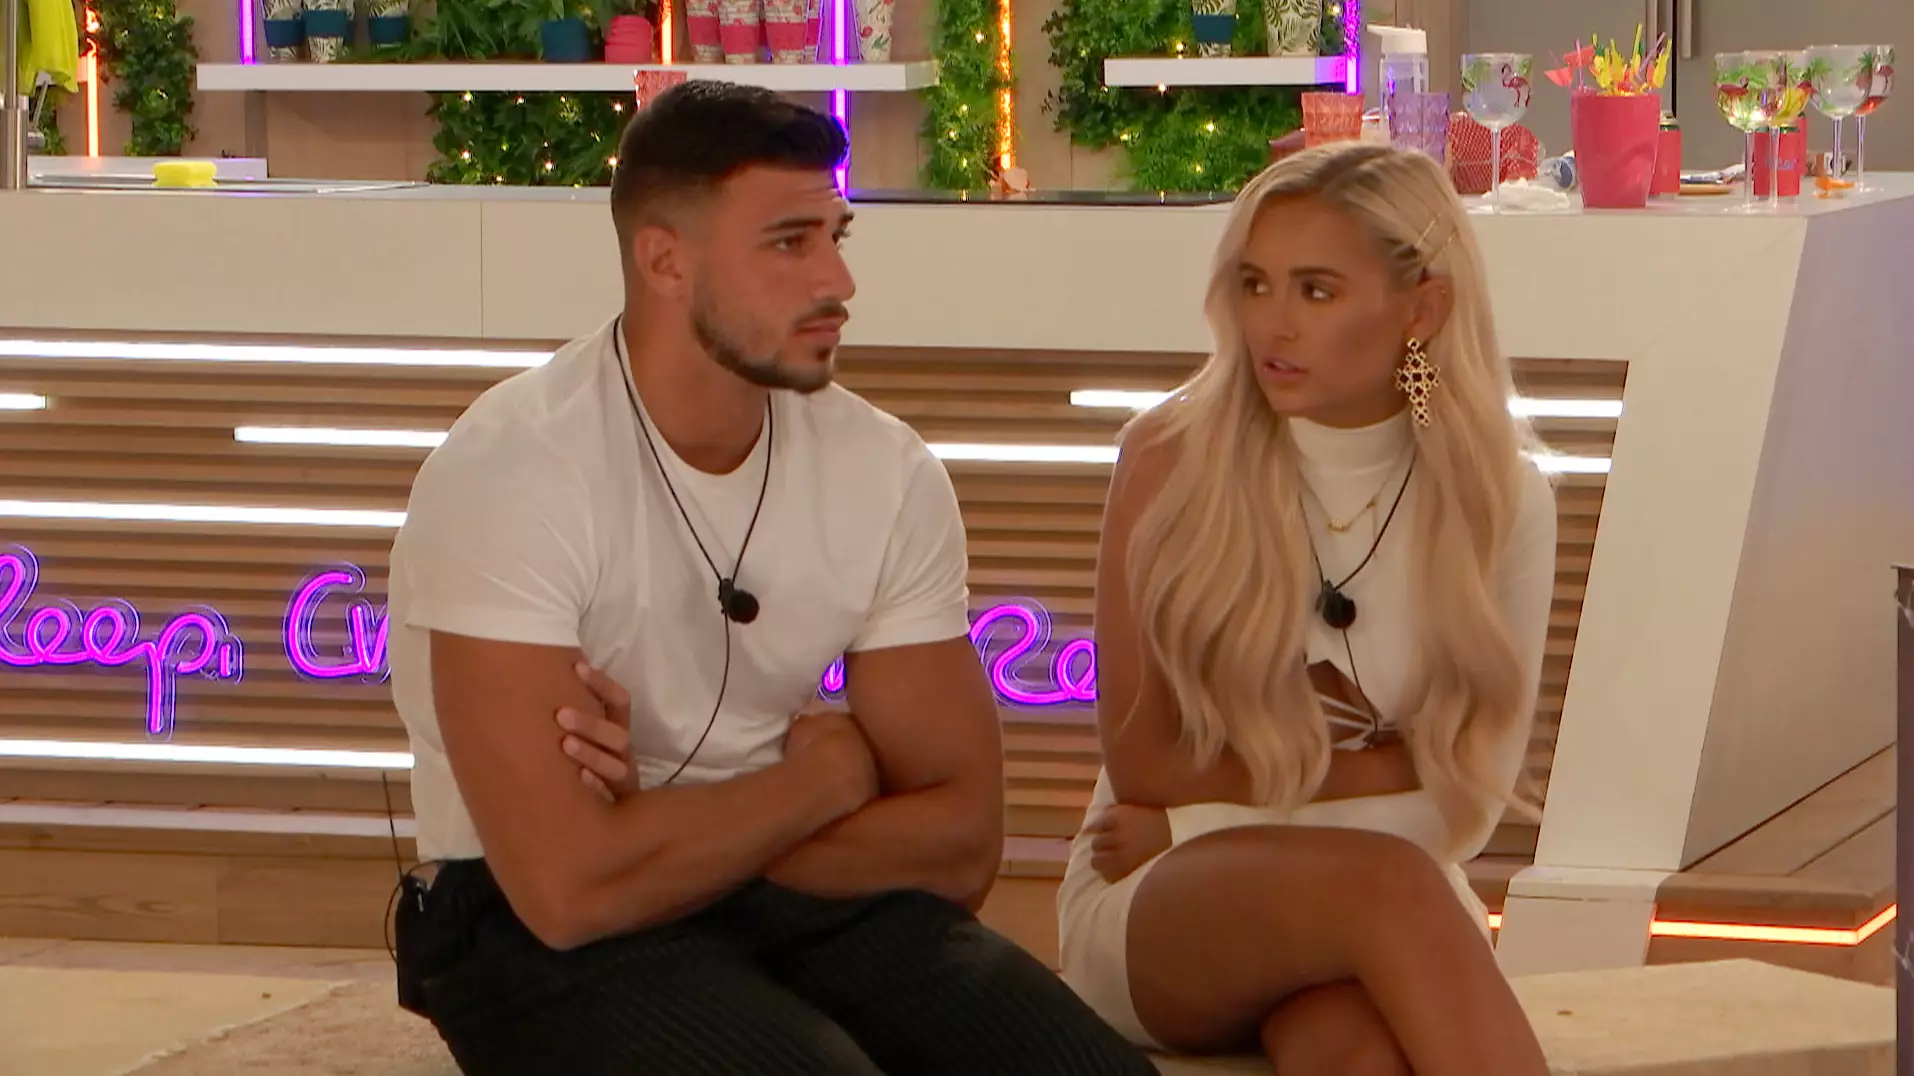 Fans Complain To Ofcom Over Tommy And Molly's 'Sex Scene' on 'Love Island'